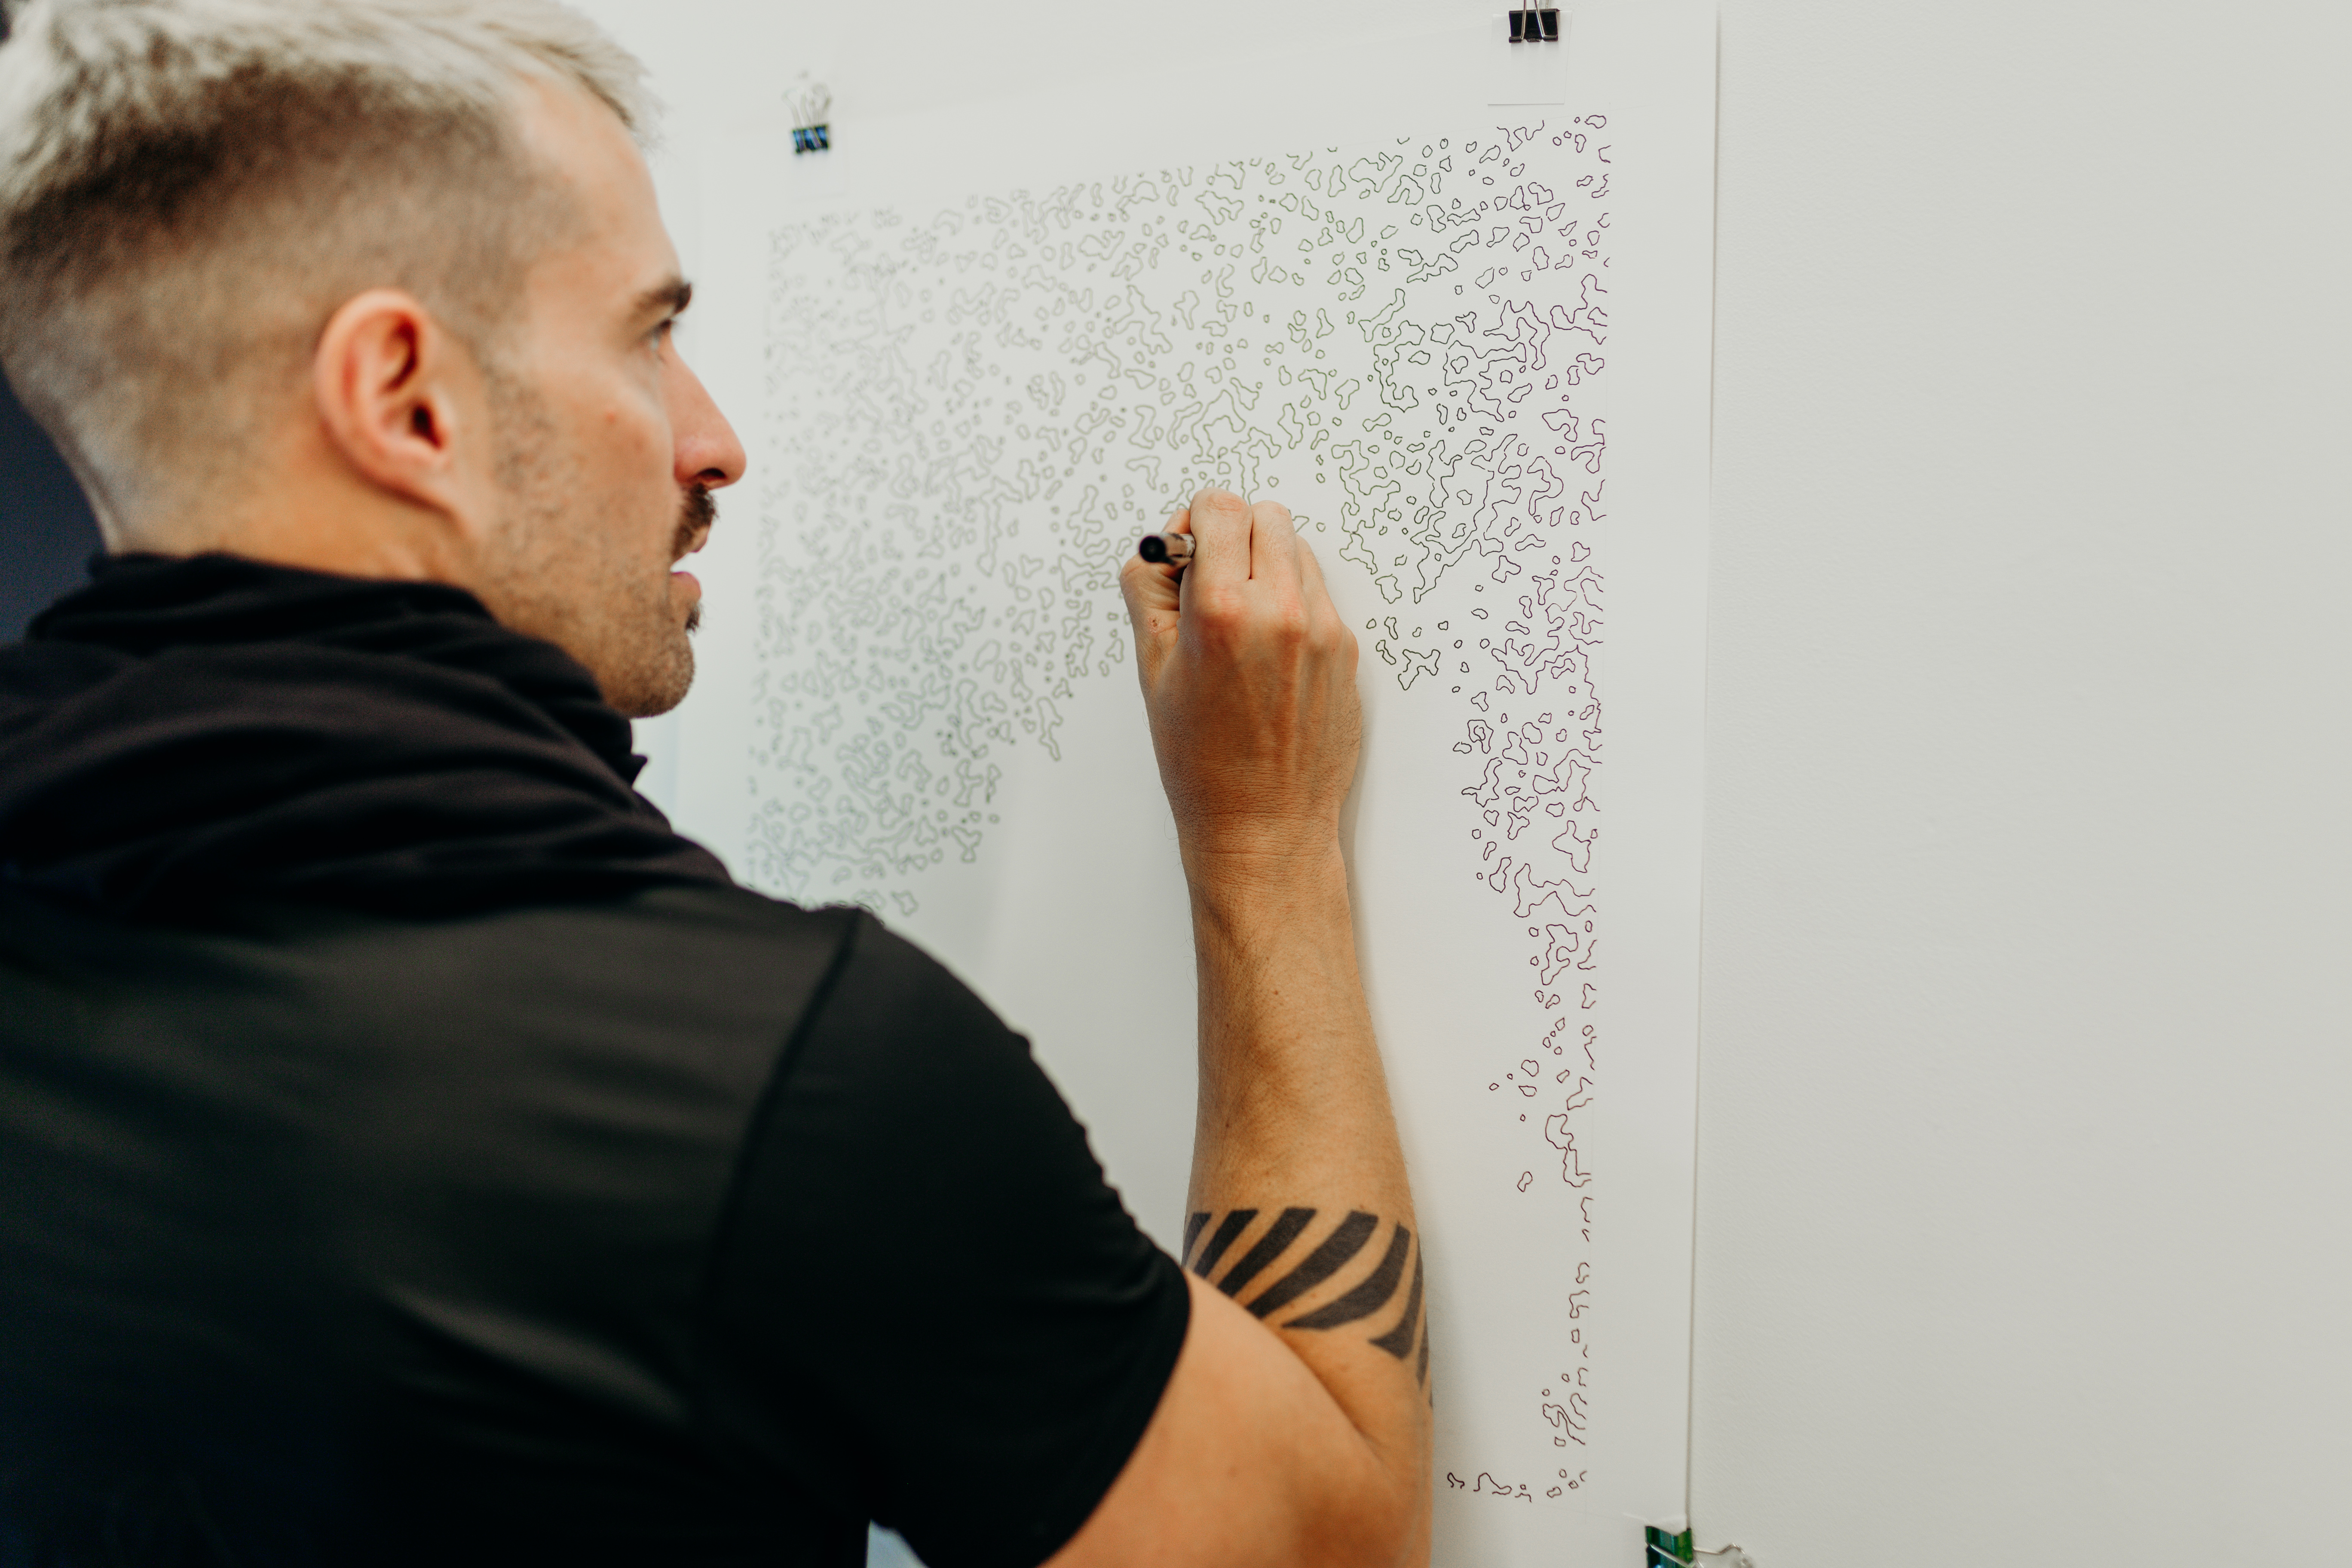 Candid shot of joel swanson drawing on a piece of paper hung on the wall. The pattern is abstract composed of several small wobbly shapes. 